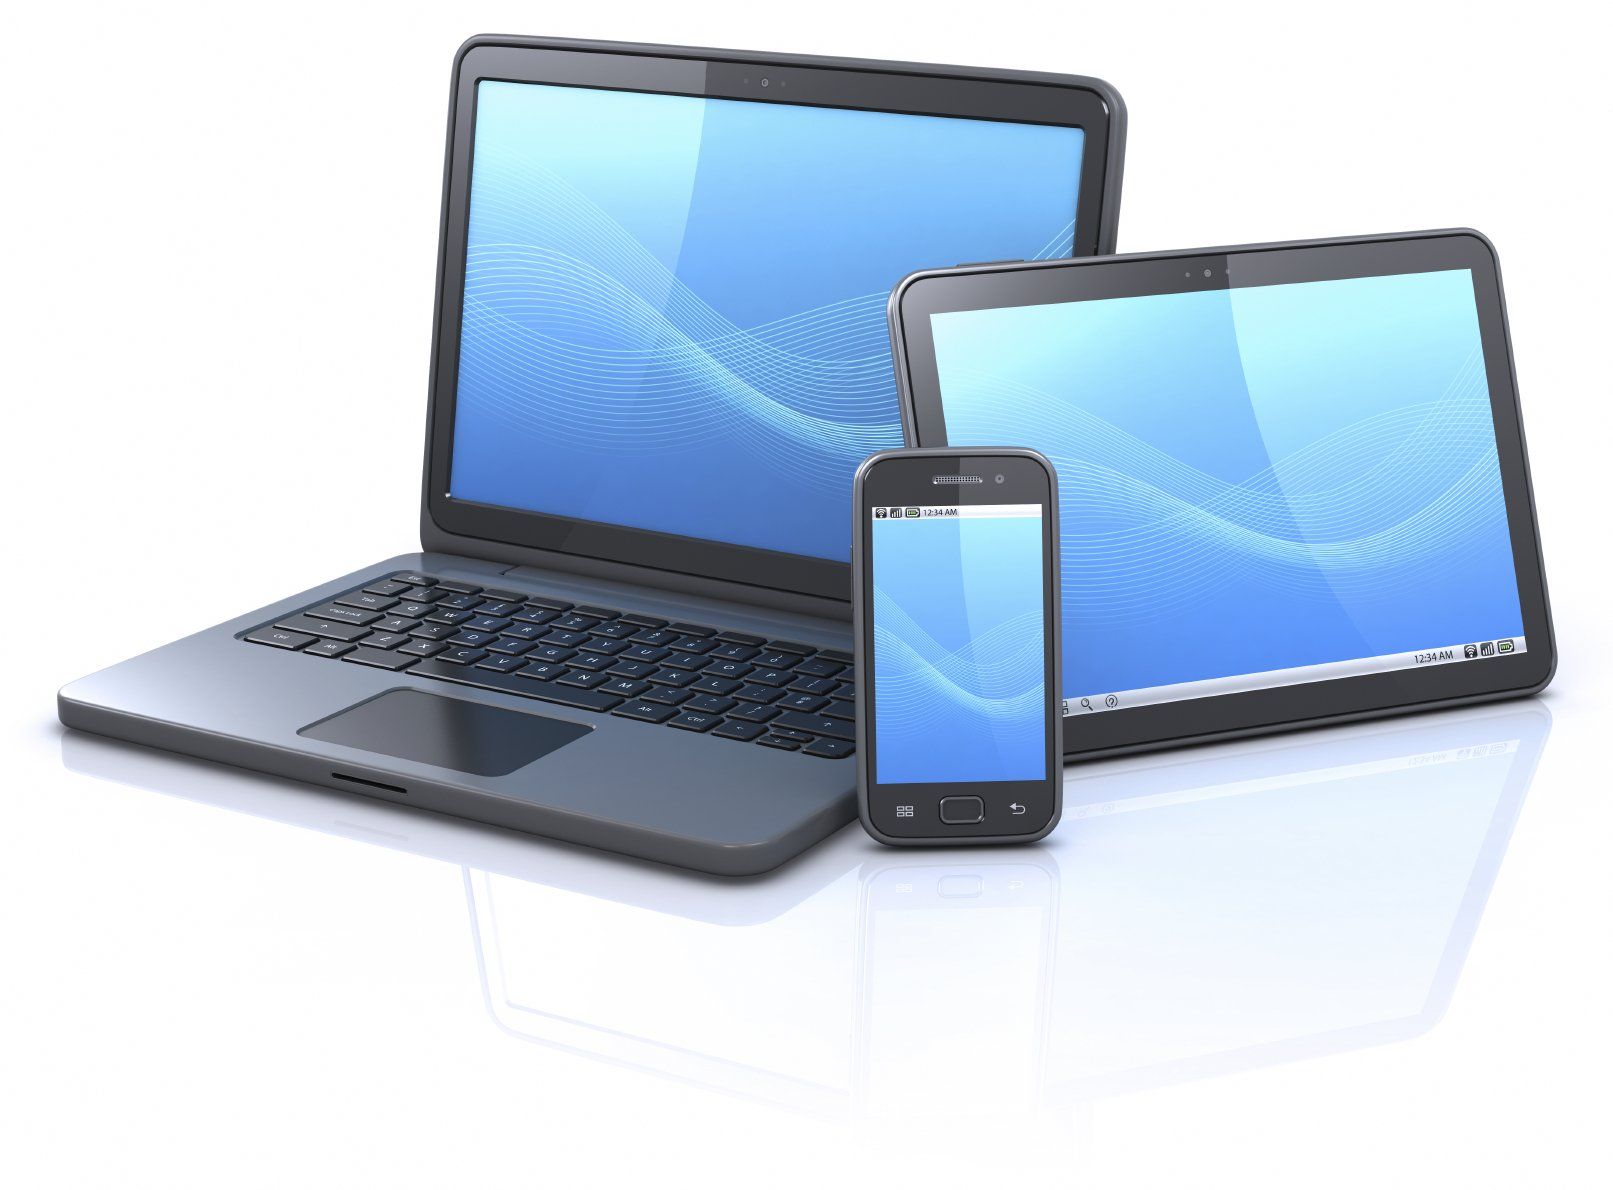 Desktop applications and mobile apps